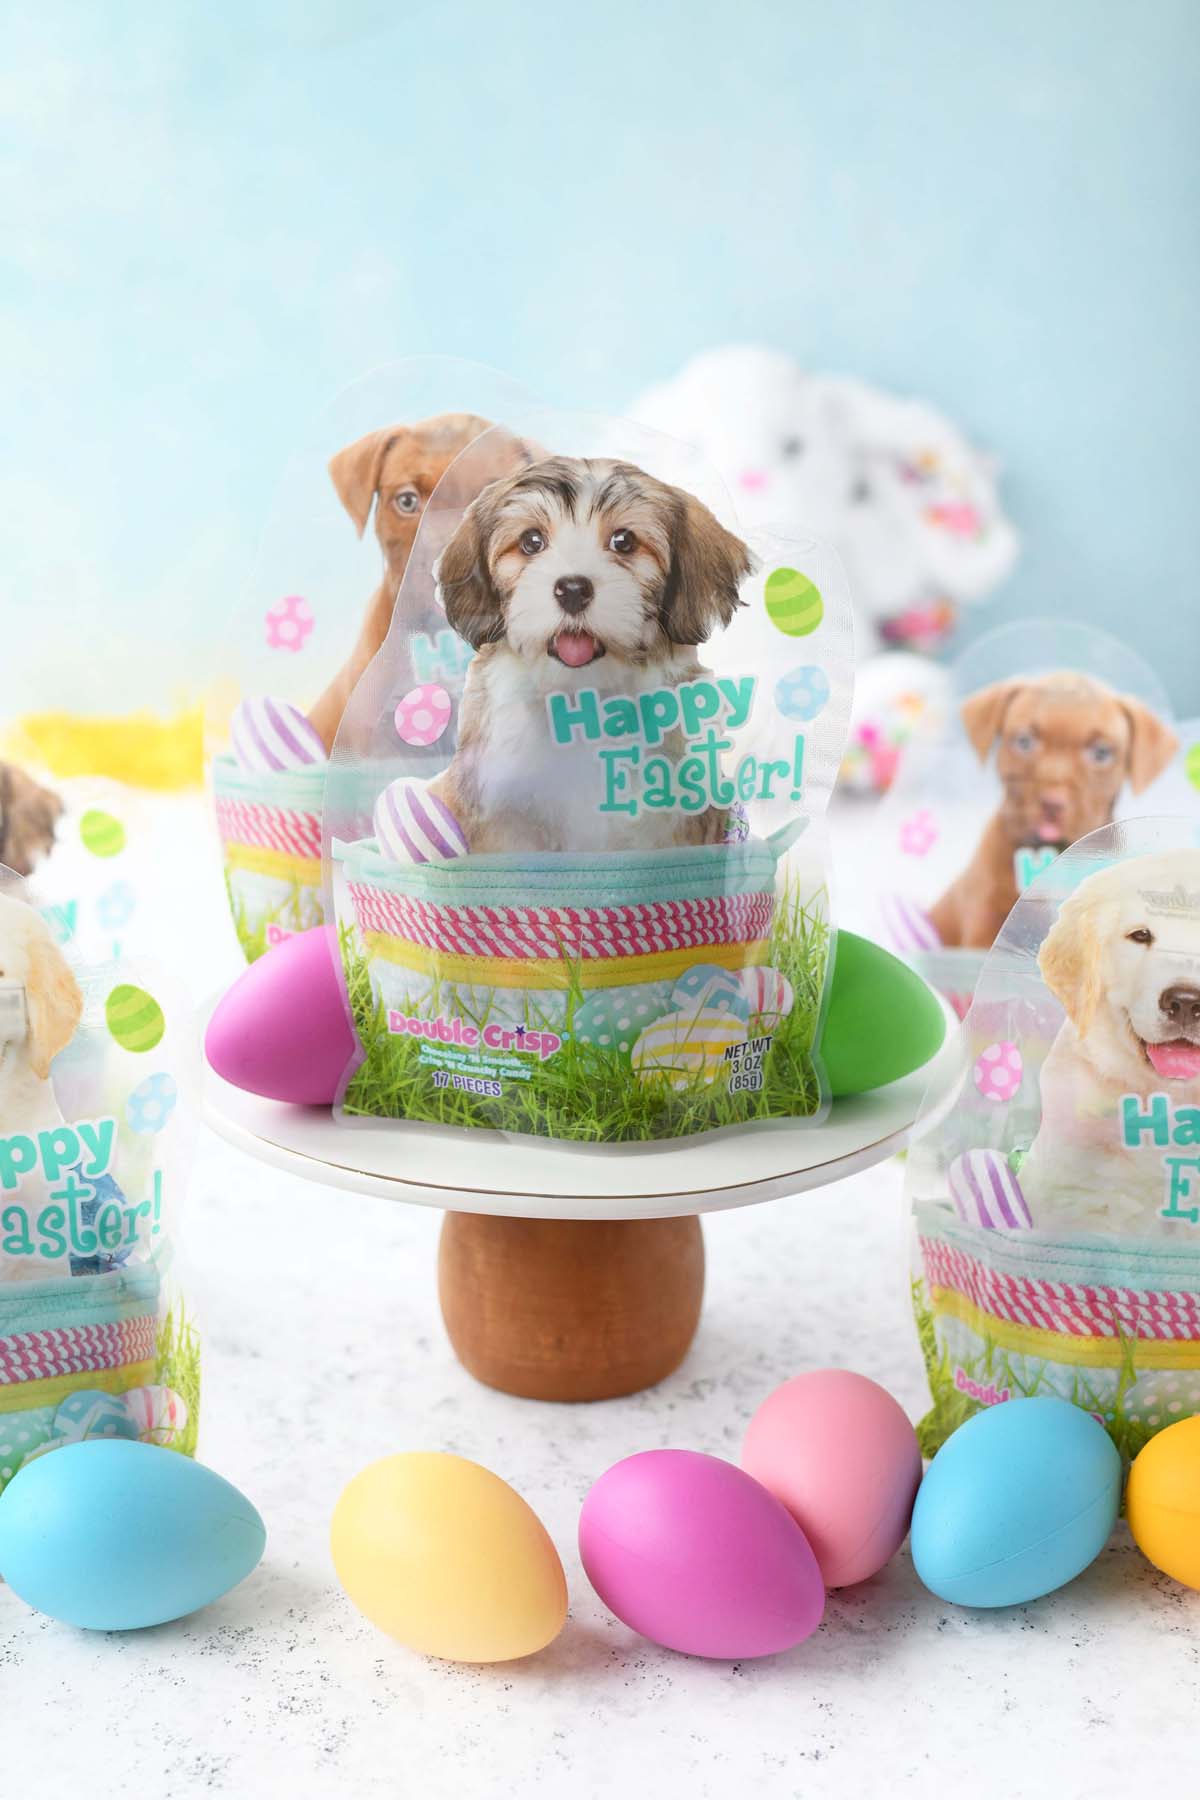 Puppy eggs on a cake stand.